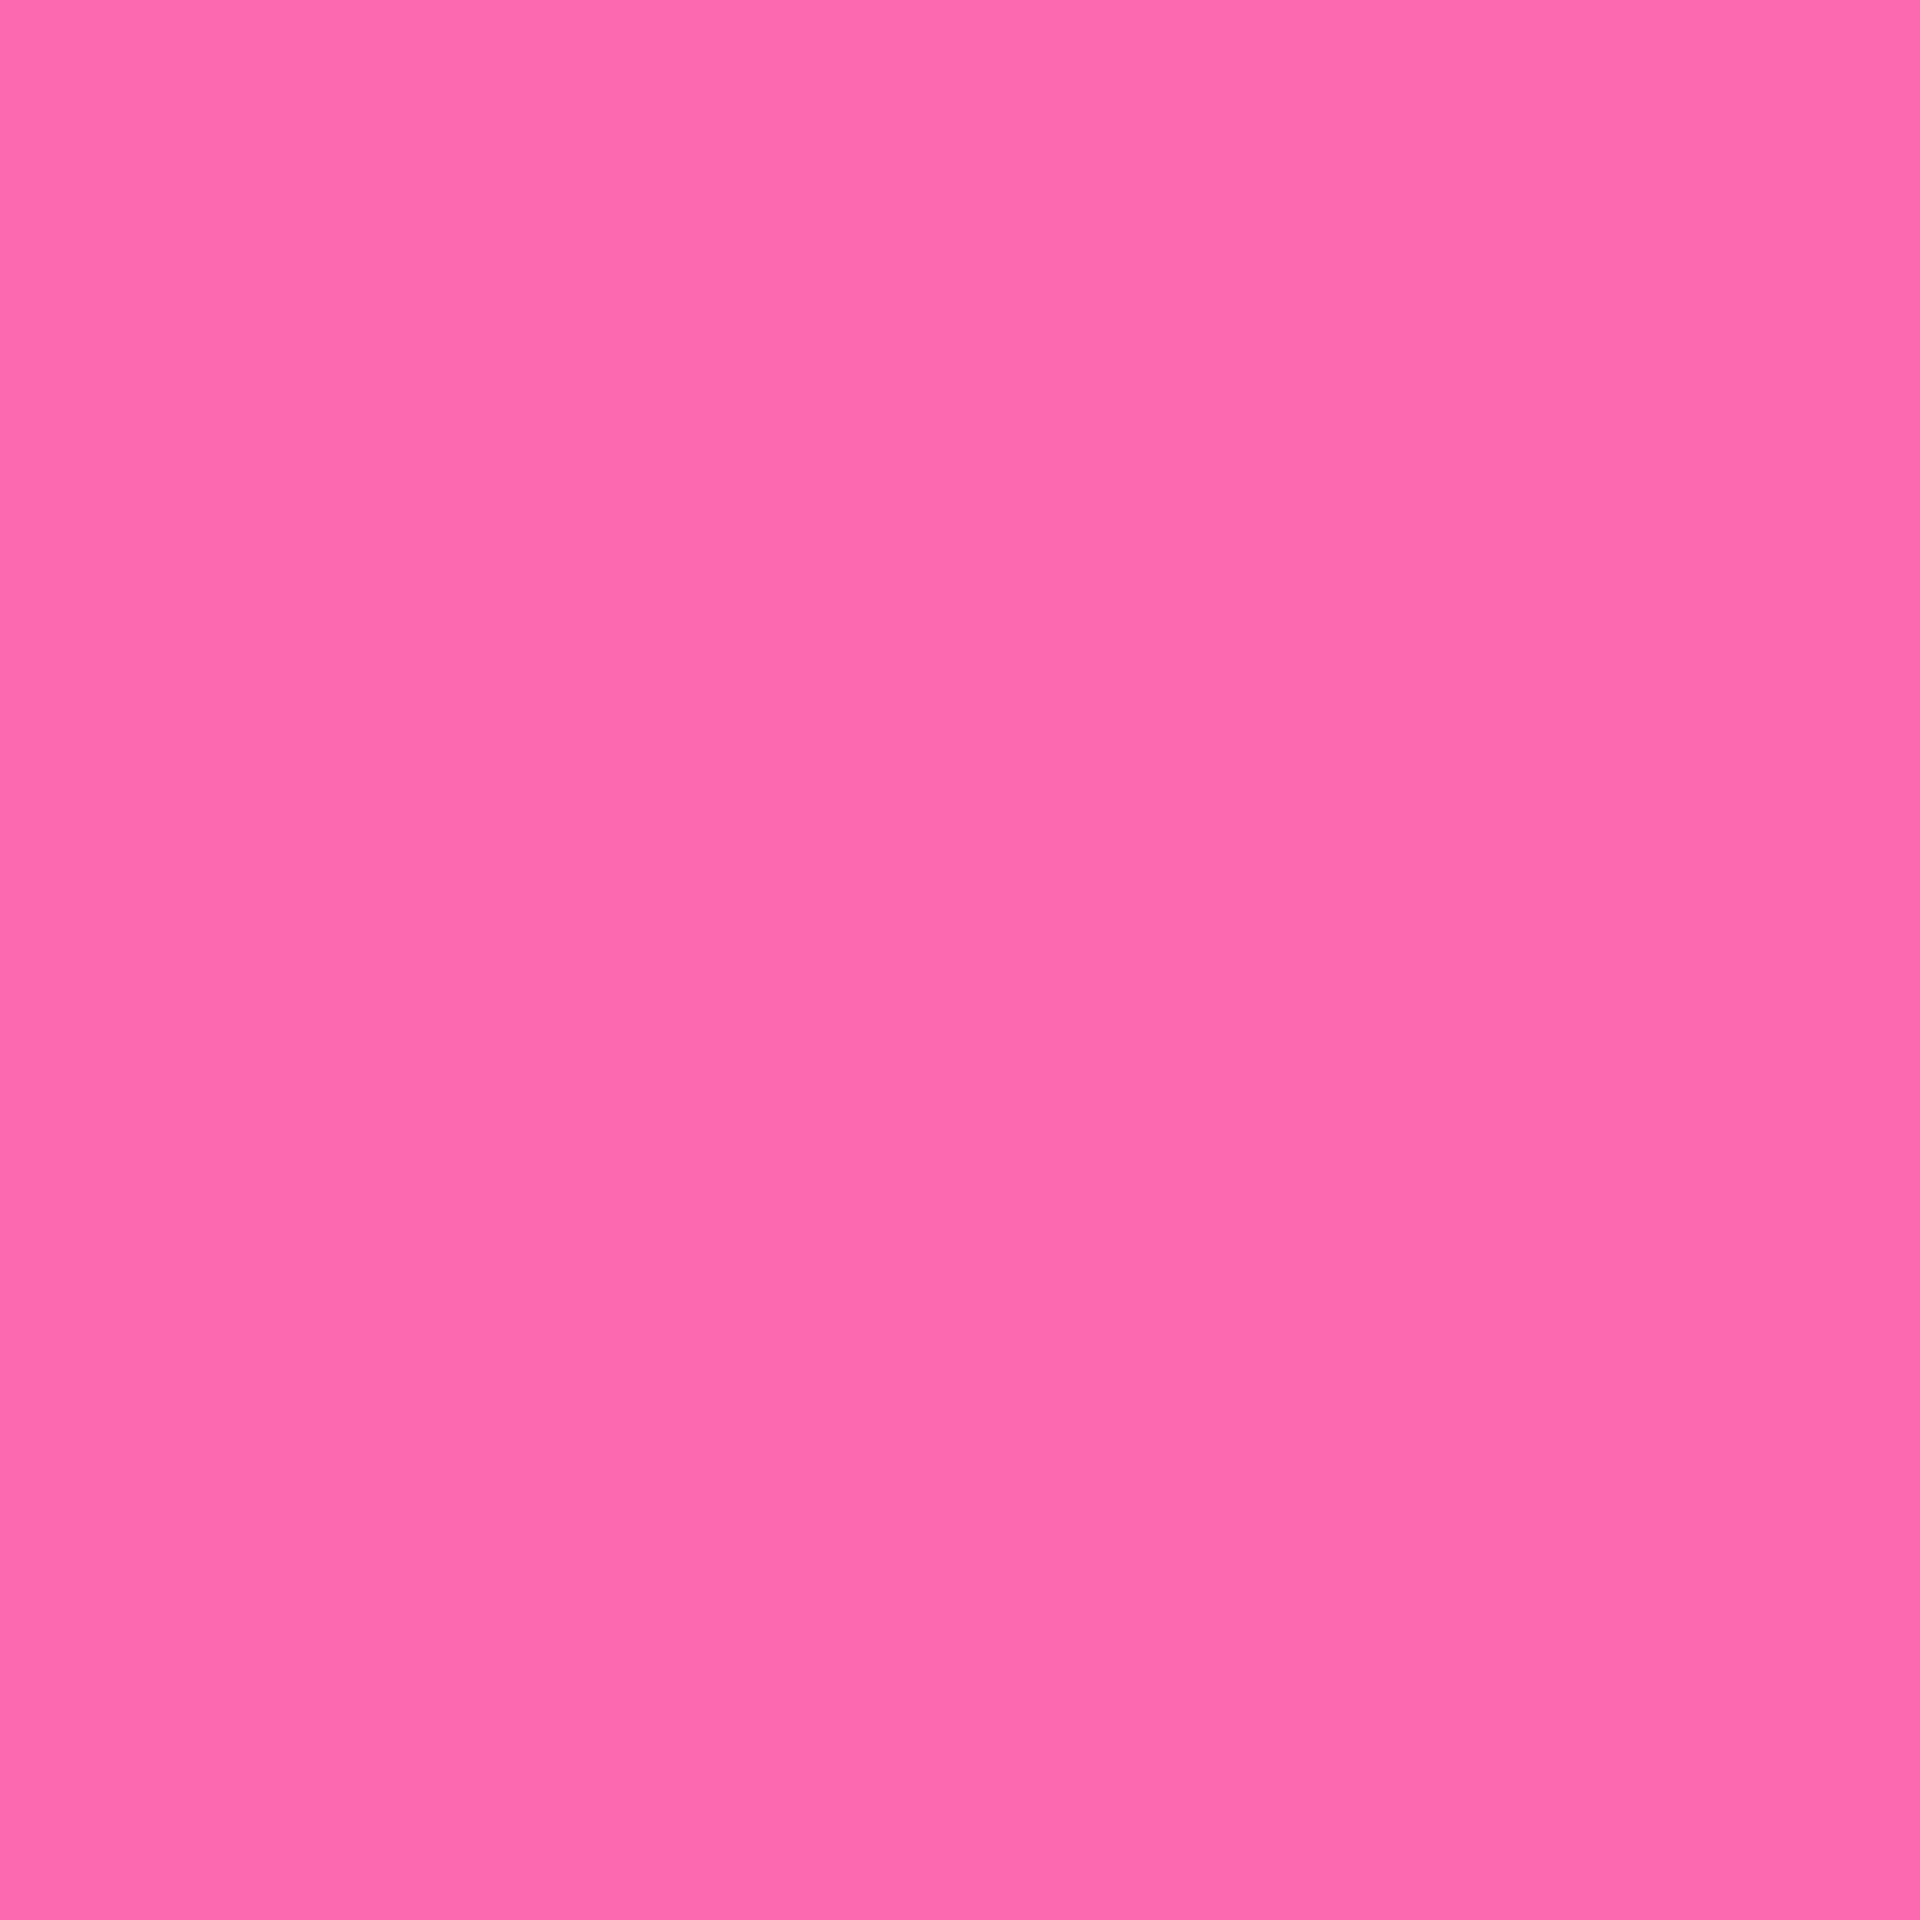 Solid Background Vibrant Hot Pink Wallpaper